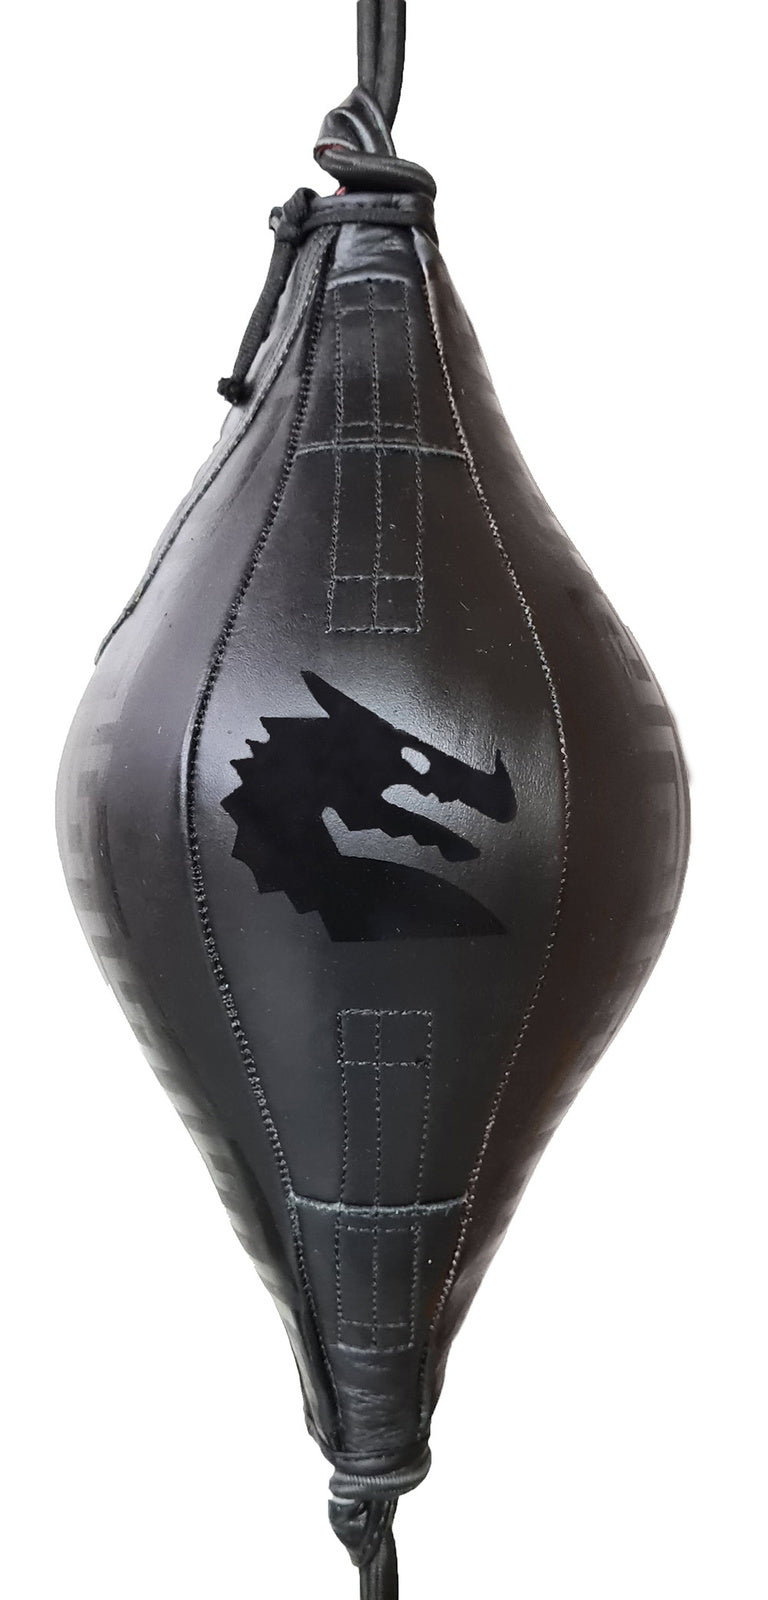 The Fitness Hero B2 Bomber floor to ceiling ball from Morgan Sports is a great tool for hand and eye coordination. Made with 100% Italian brushed cowhide leather. 35cm in length and 16 cm in diameter